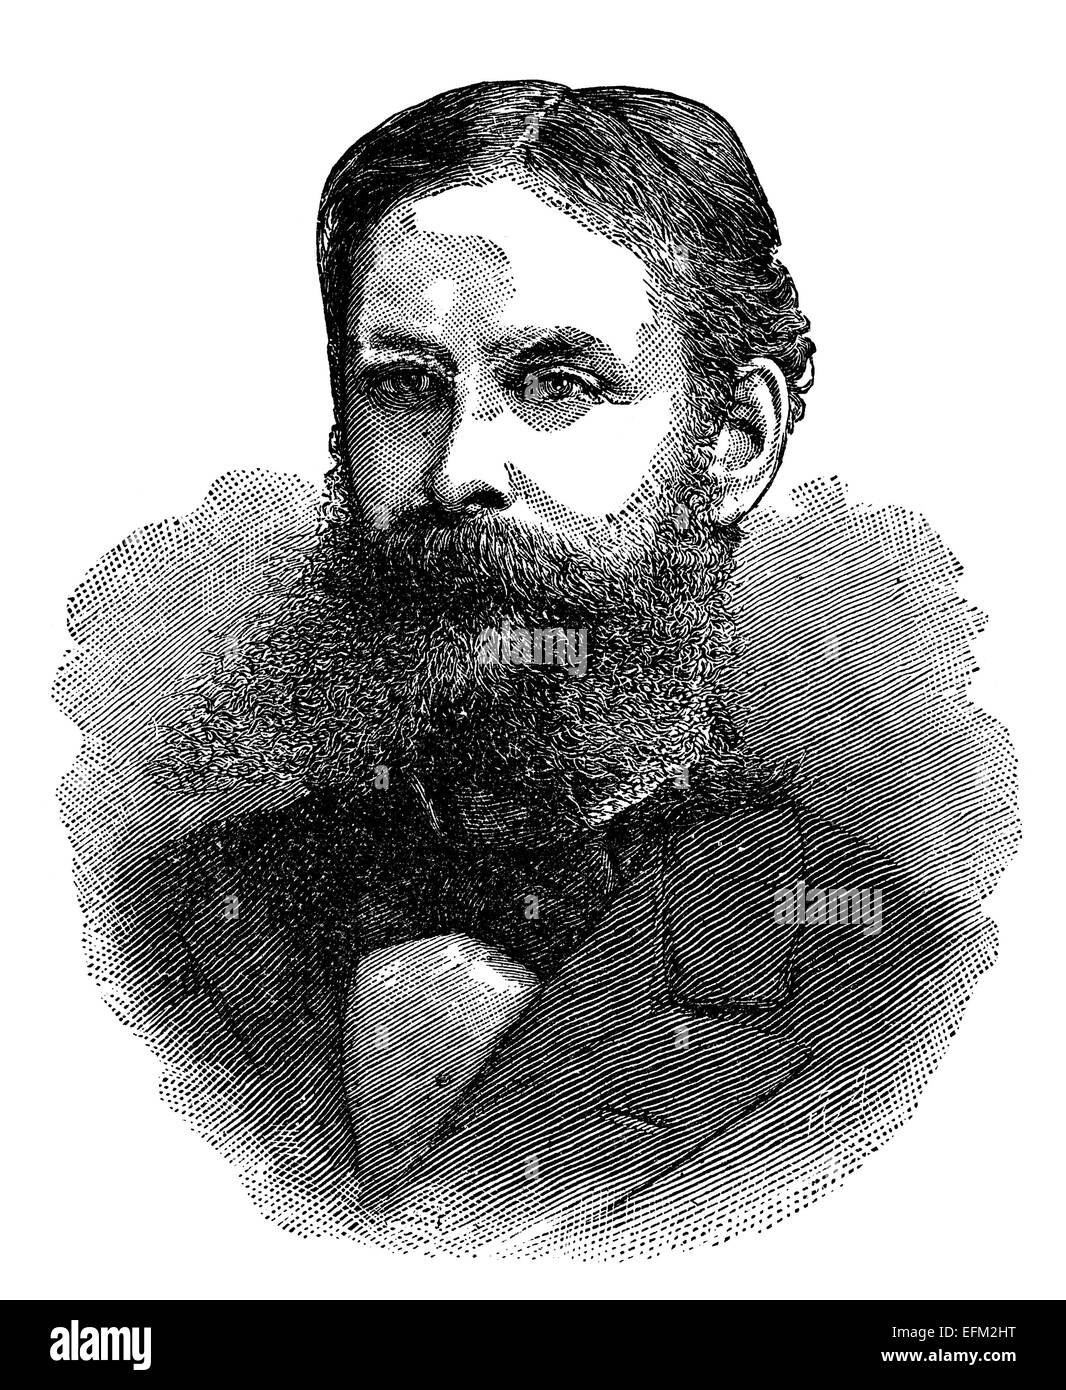 19th century engraving of a man with a beard Stock Photo